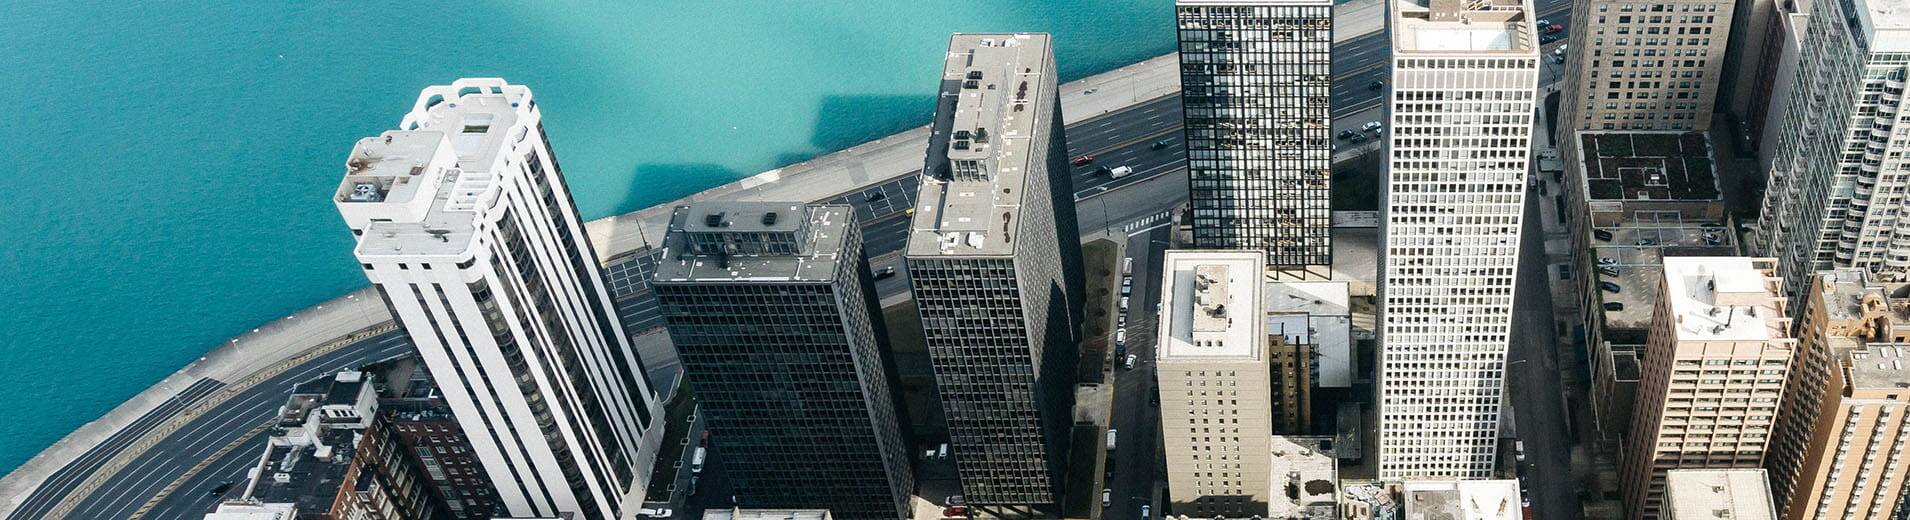 Aerial_view_of_Chicago_P_0060